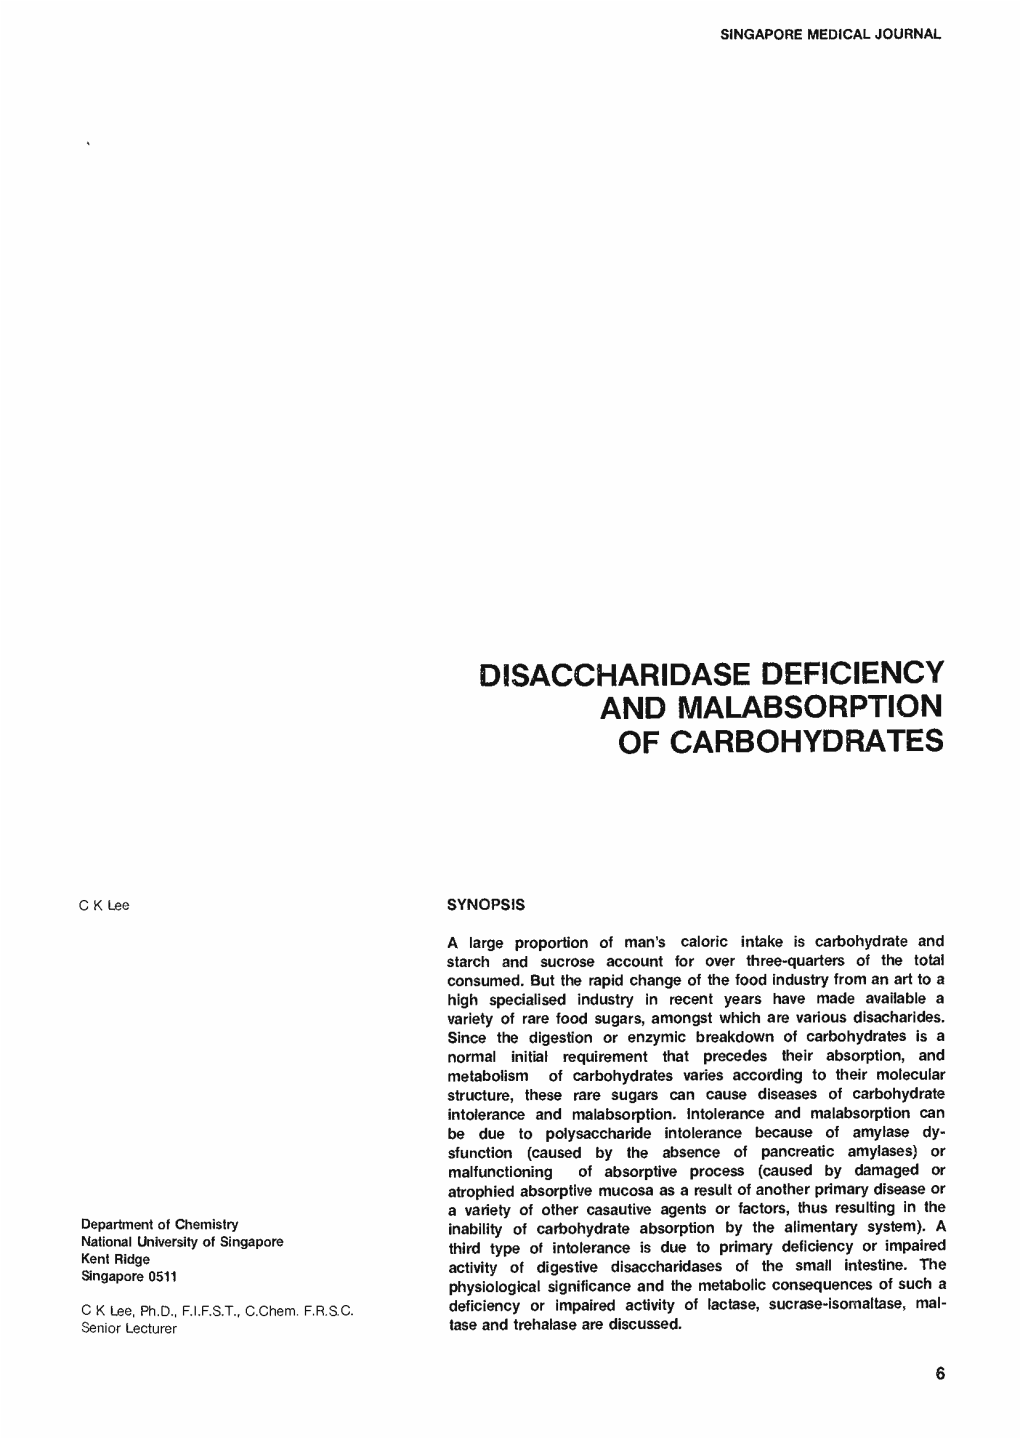 Disaccharidase Deficiency and Malabsorption of Carbohydrates